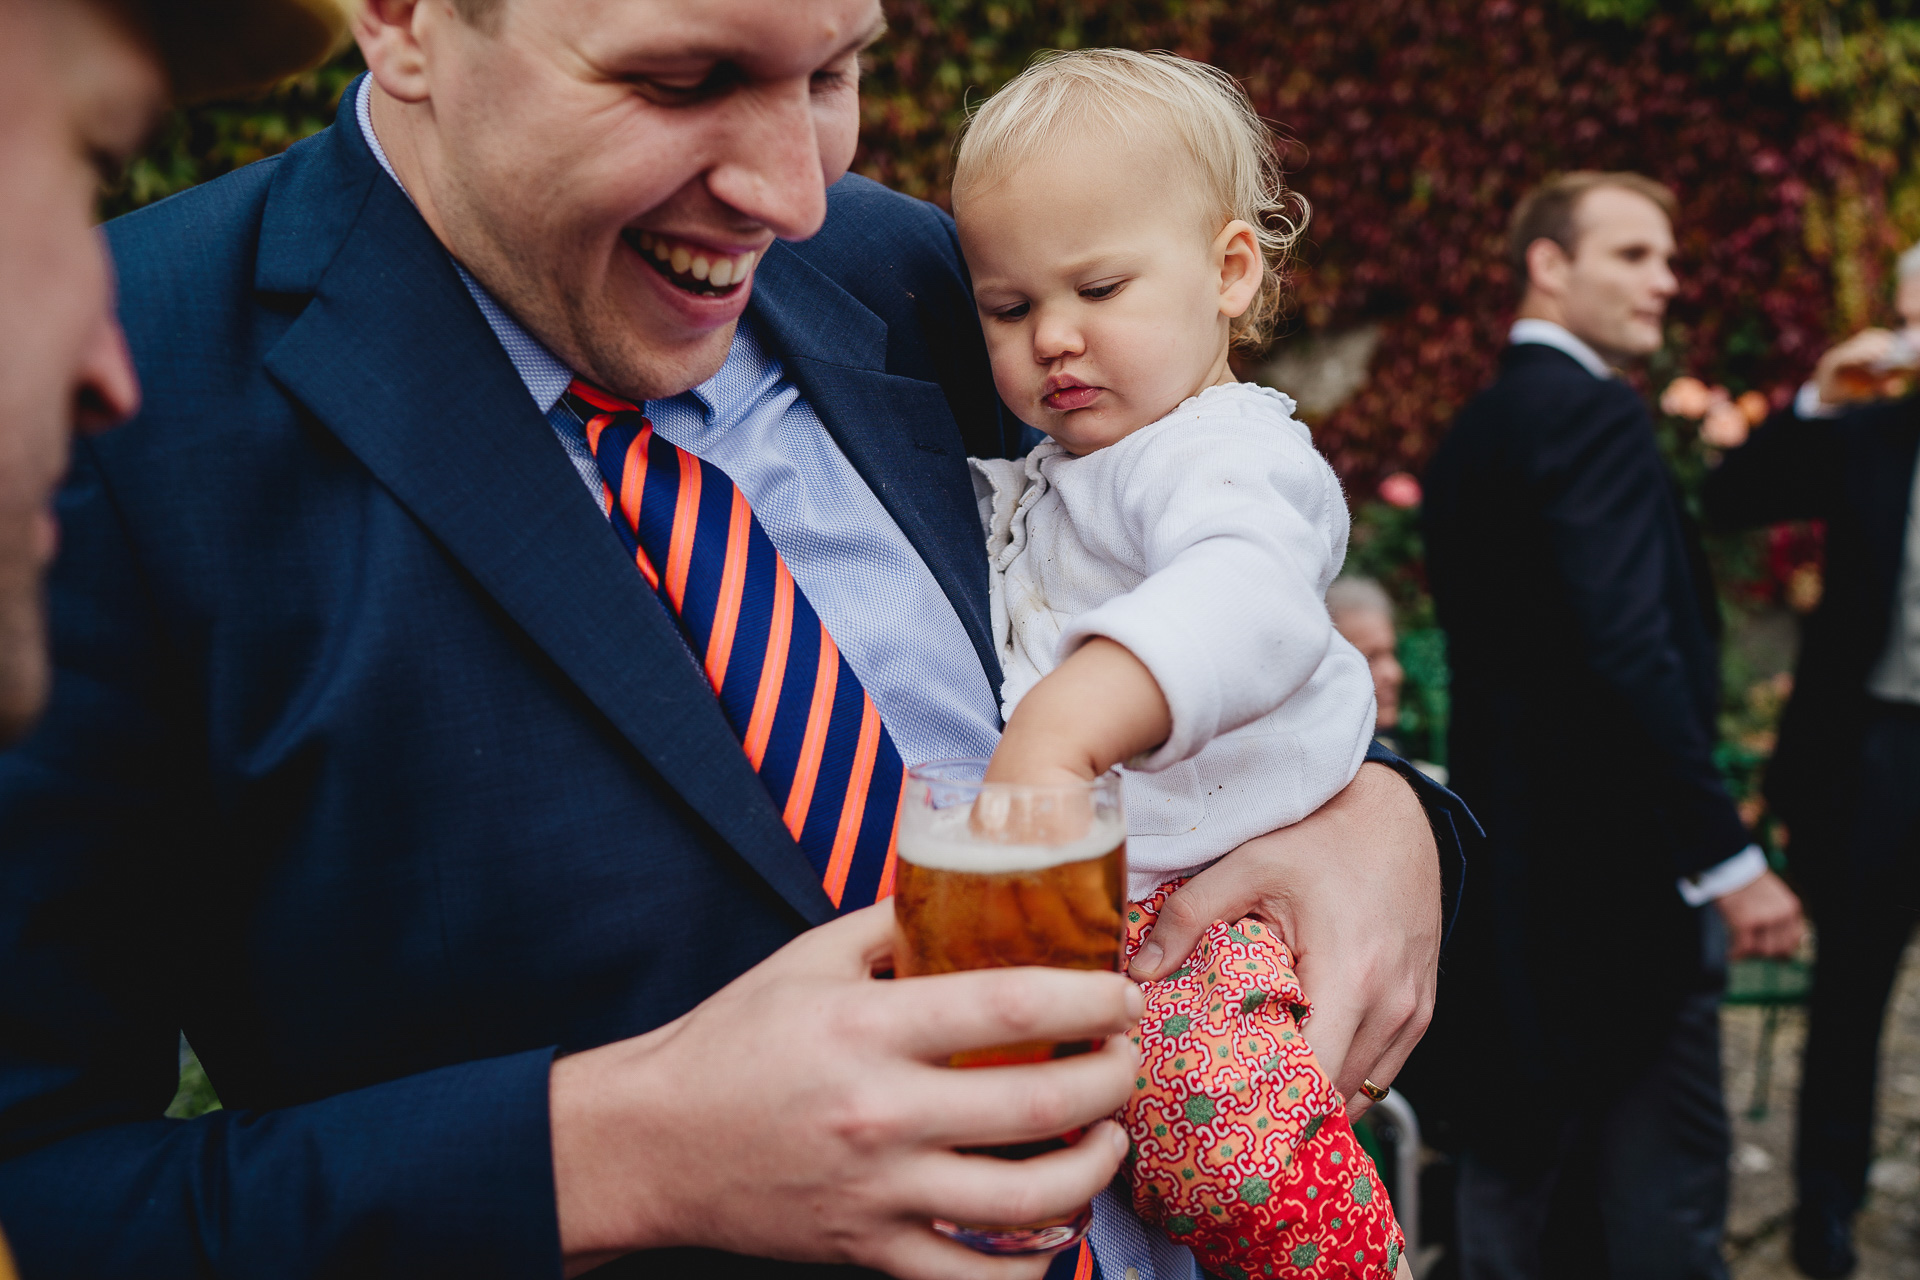 Baby with it's hand in a pint of beer